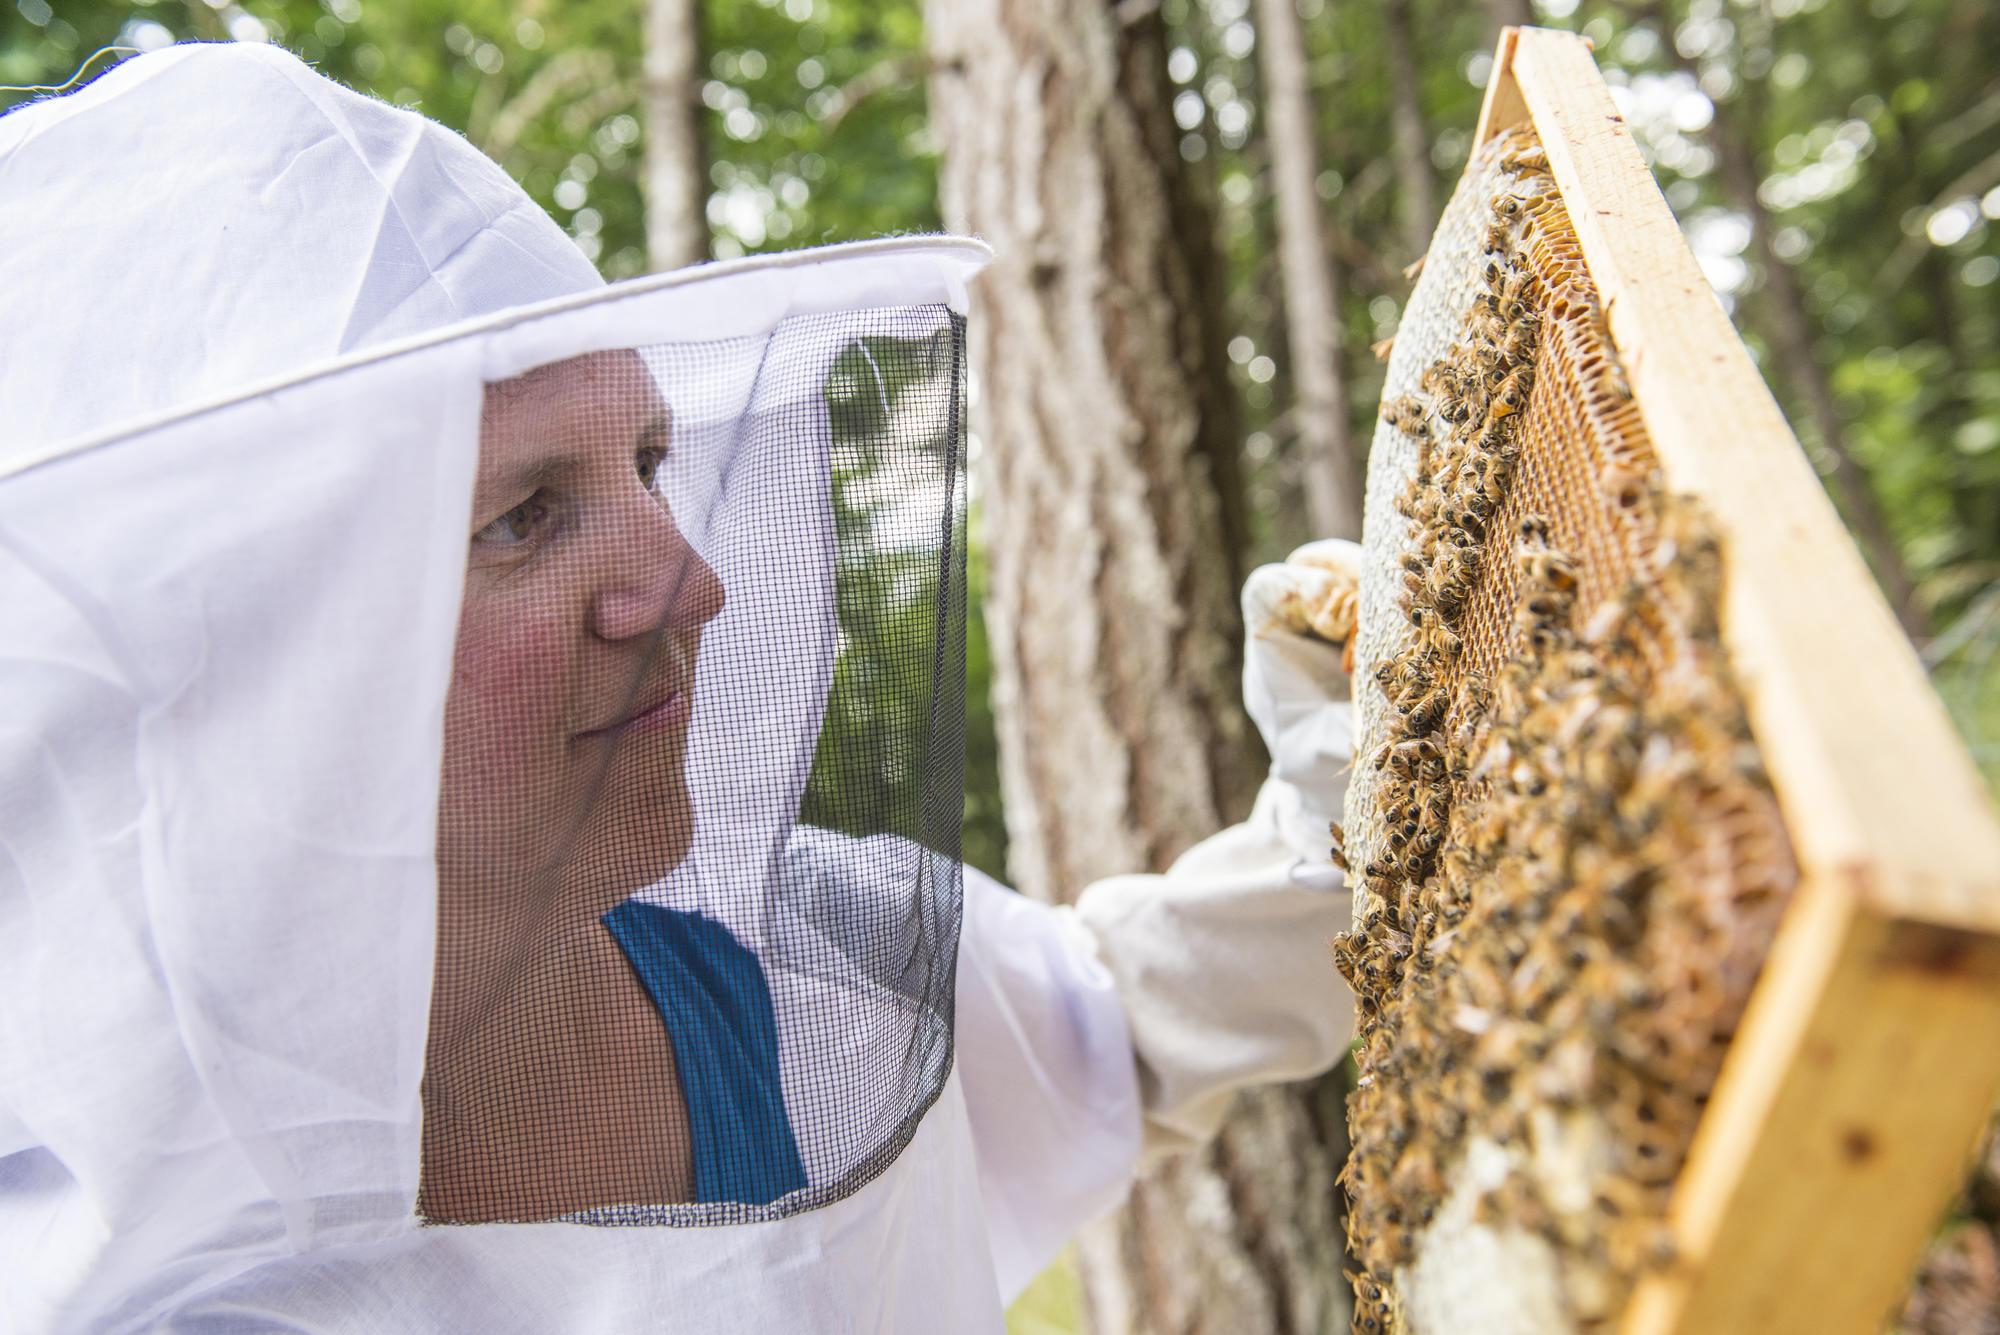 woman in protective gear examines tray of bees from hive